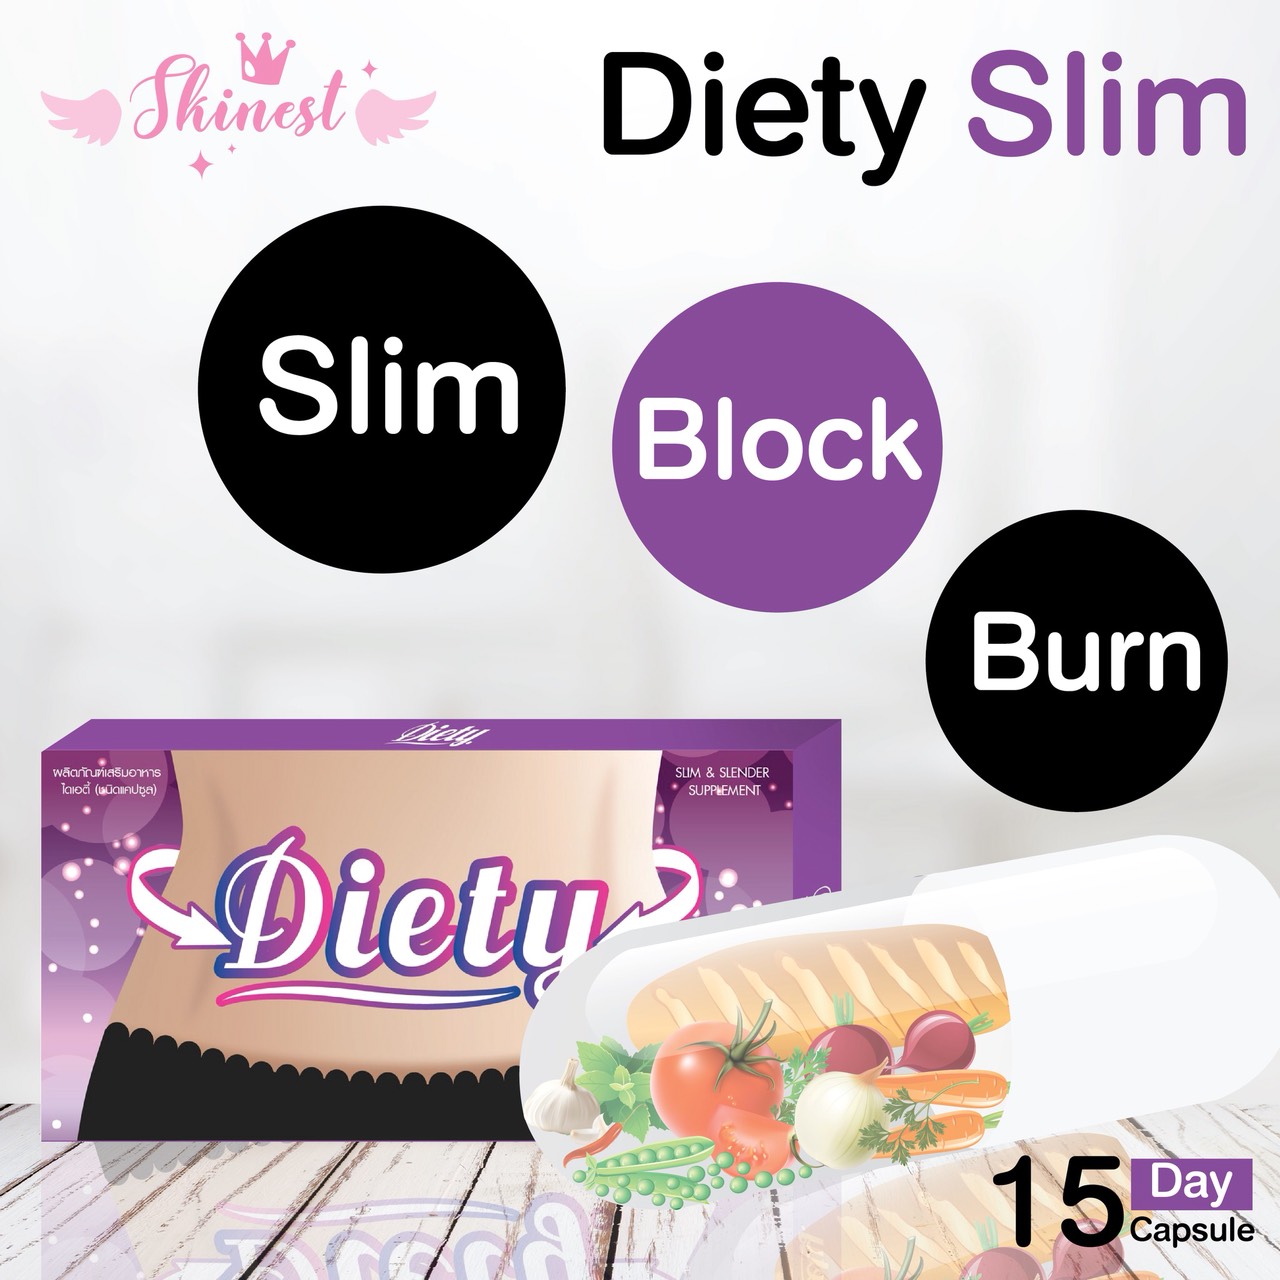 15 CAPS DIETY (GLUTA LAPUNZEL) SLIM & SLENDER WHITENING SKIN DIETARY SUPPLEMENT WEIGHT LOSS SLIM AND FIT by www.ccthaitown.com